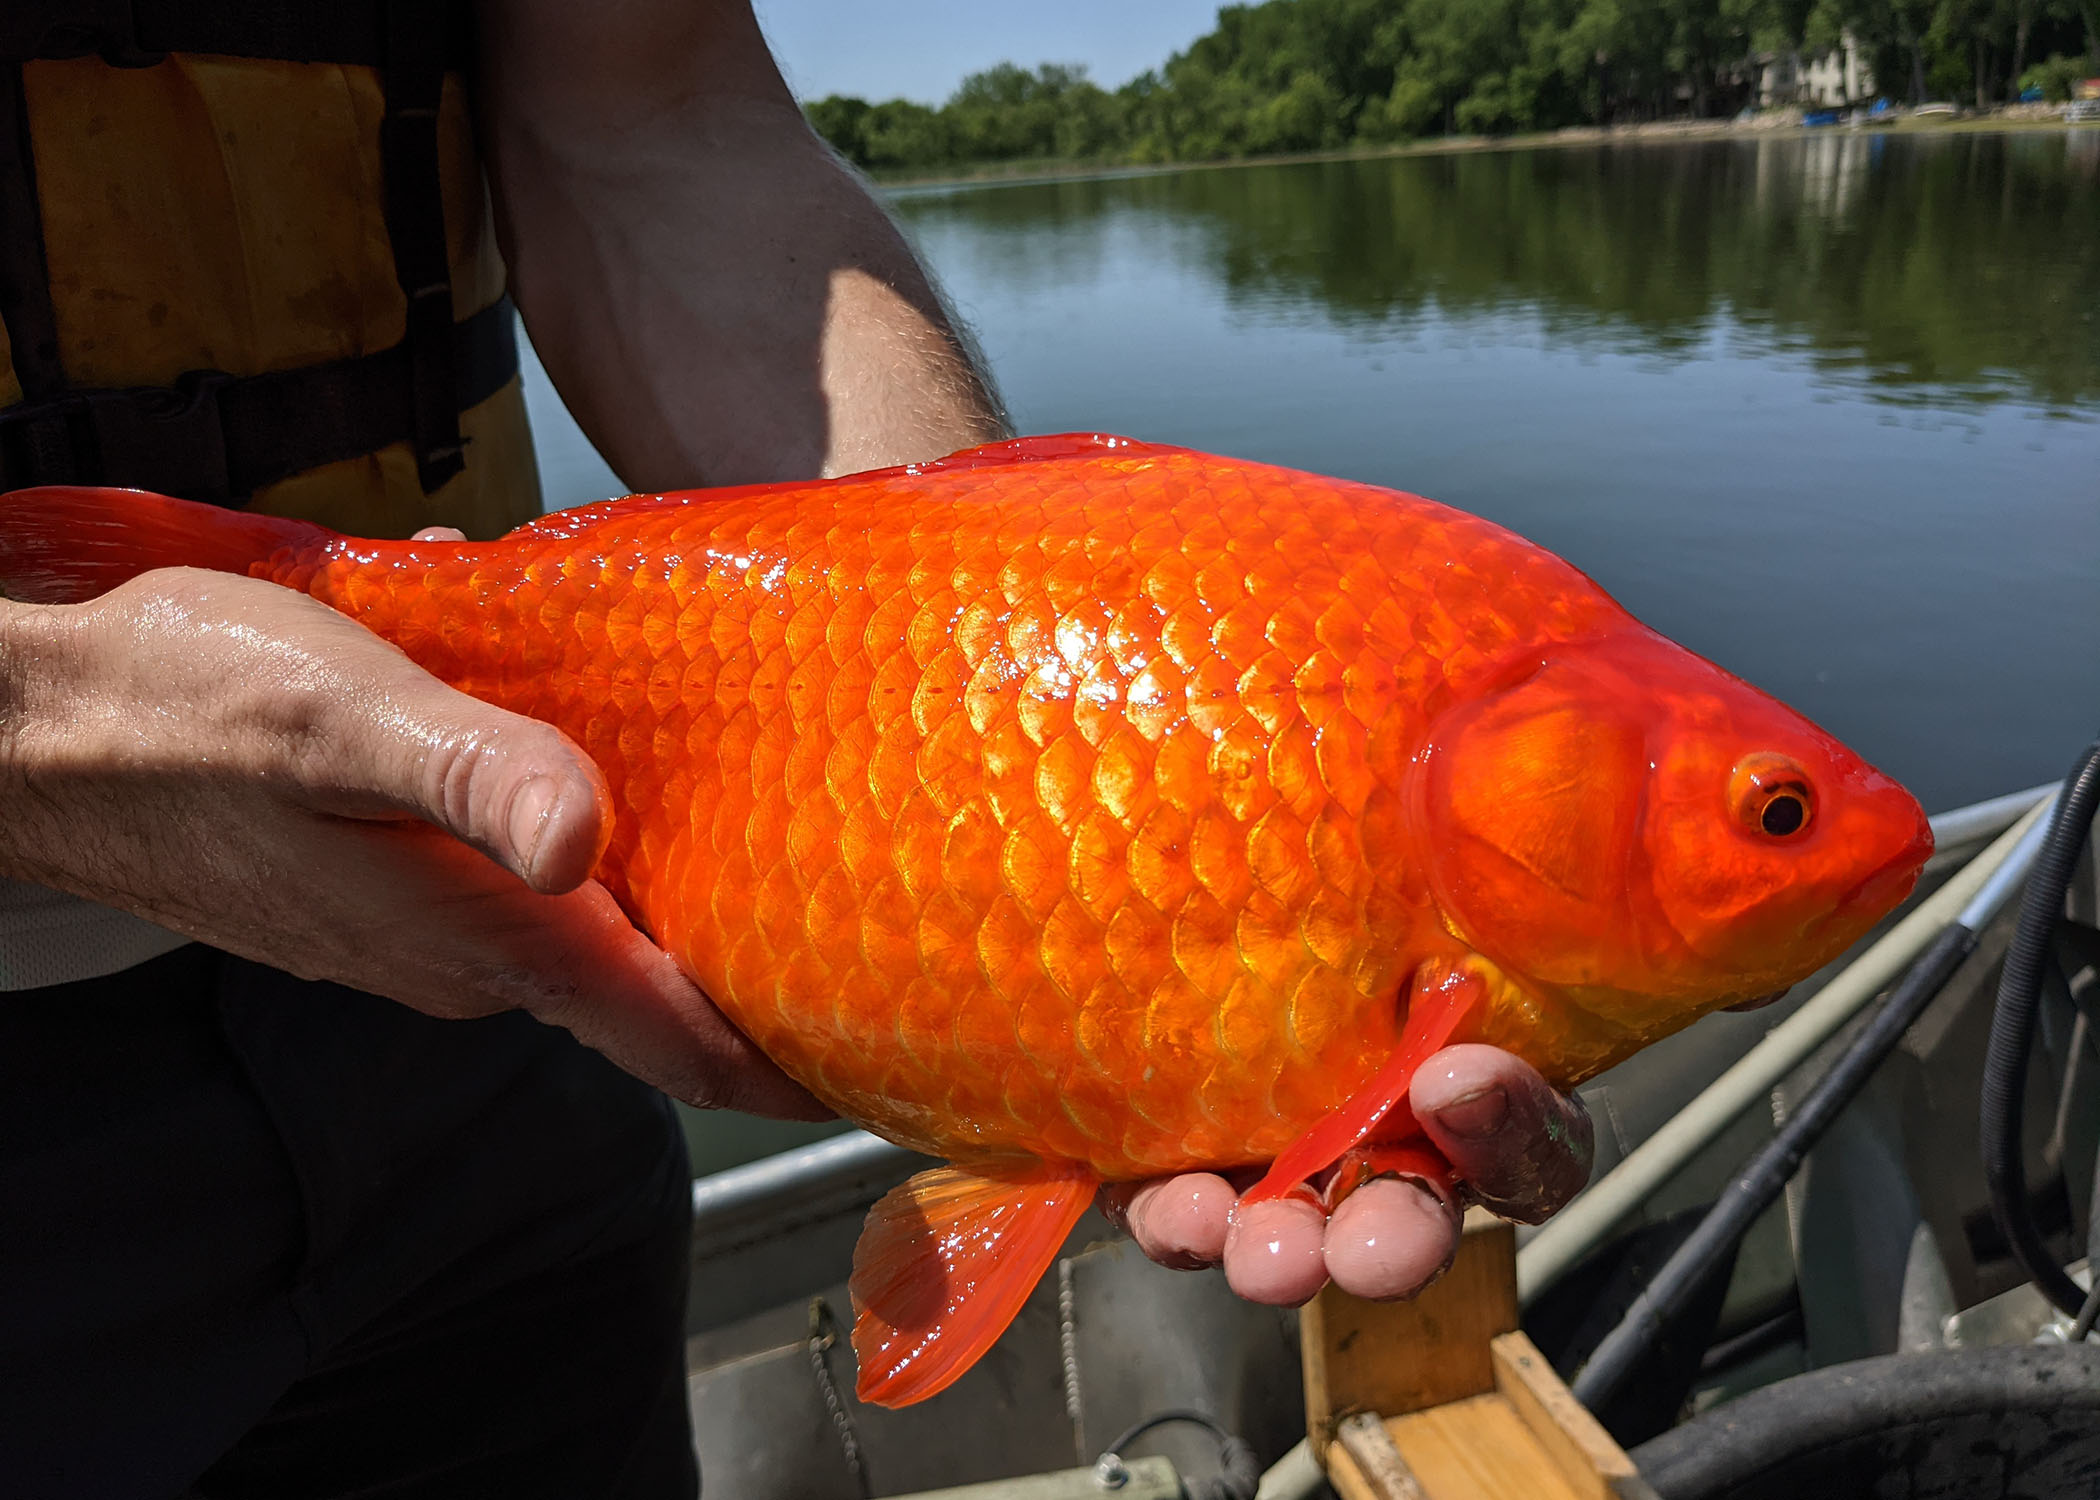 Goldfish more than 1 foot in size discovered in Minnesota; warning issued